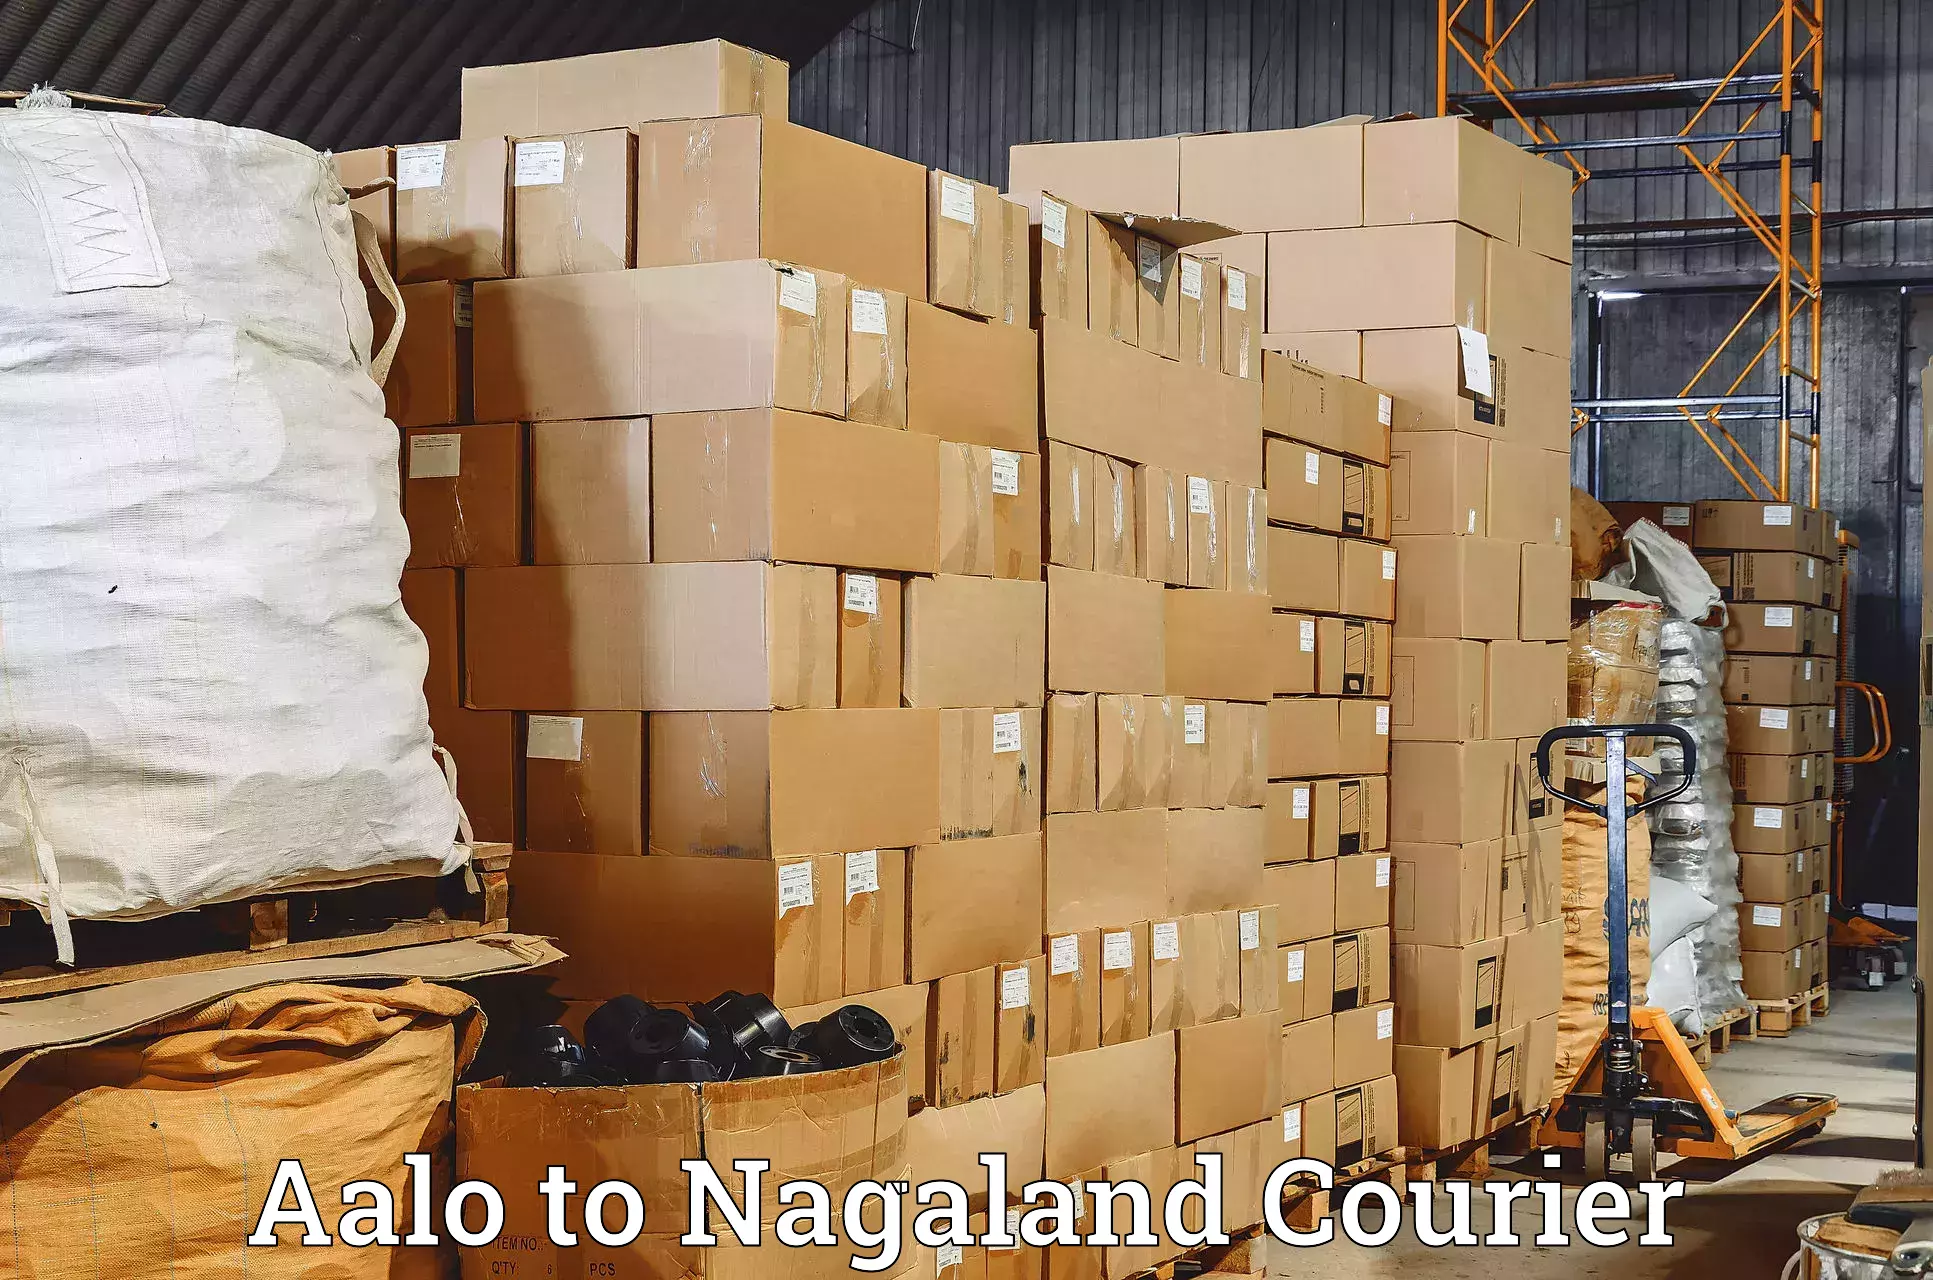 Cash on delivery service Aalo to Nagaland